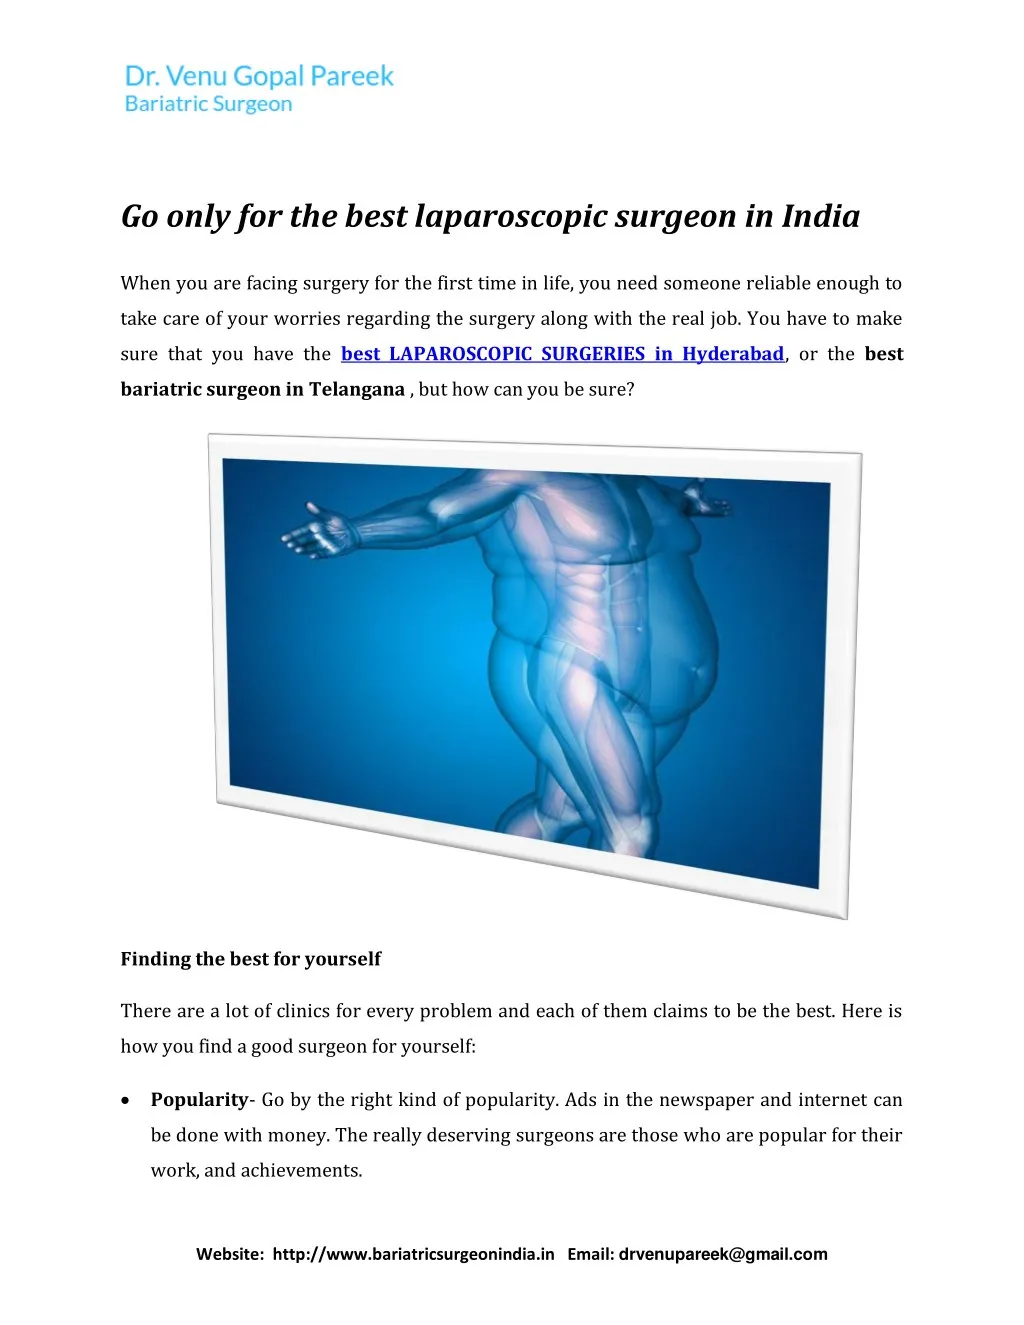 go only for the best laparoscopic surgeon in india